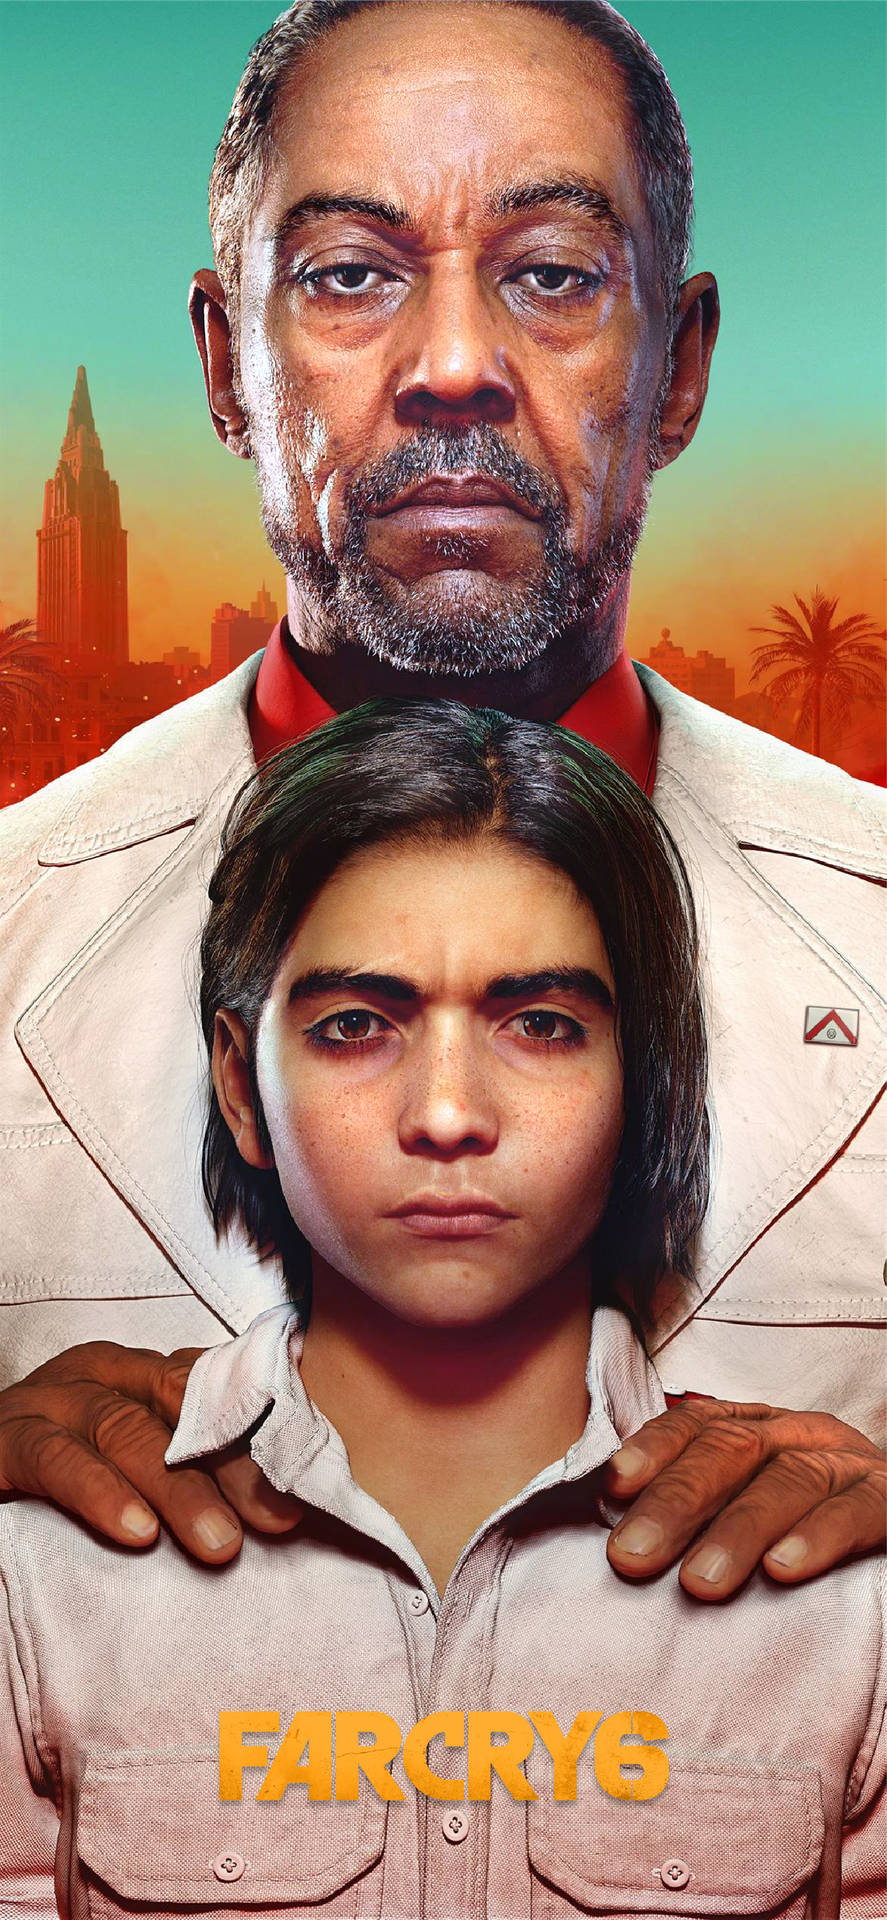 Father And Son Far Cry Iphone Wallpaper